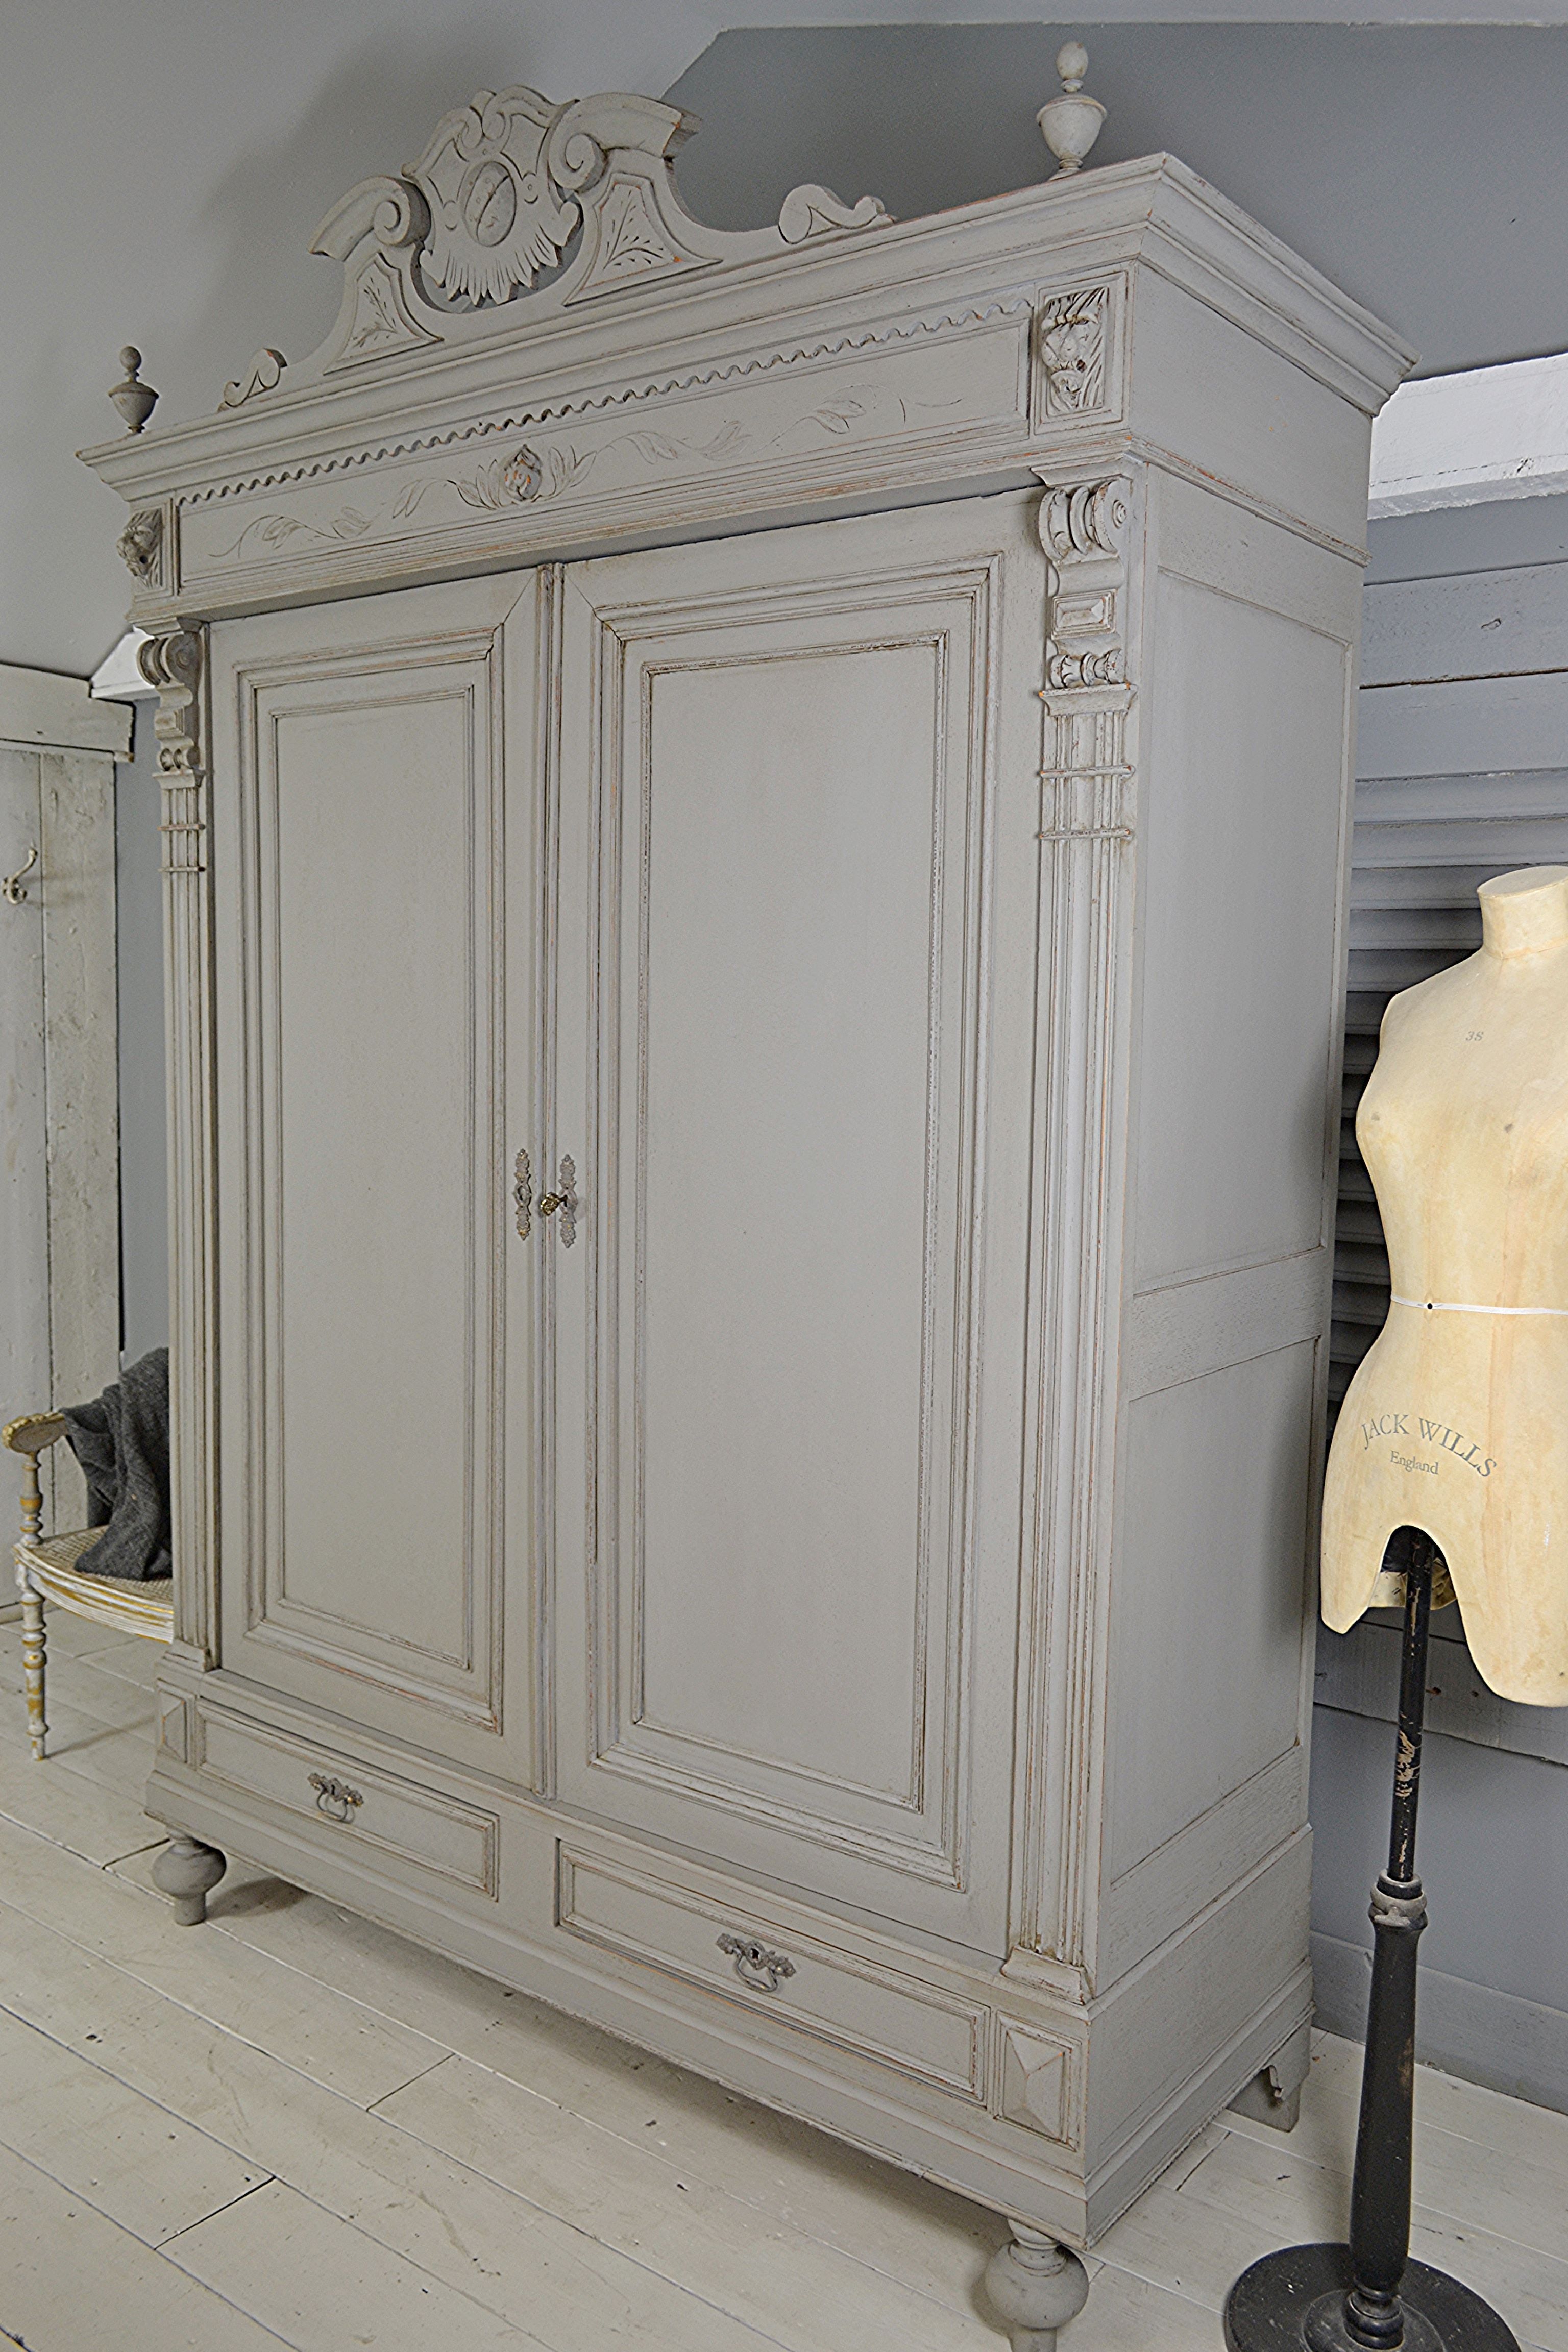 Letstrove This Beautiful Ornate, French Oak, Knock Down Wardrobe Is Perfect  If You Don't Have Easy Acce… | Wardrobe Furniture, Furniture Makeover,  Painted Wardrobe Intended For Ornate Wardrobes (View 6 of 15)